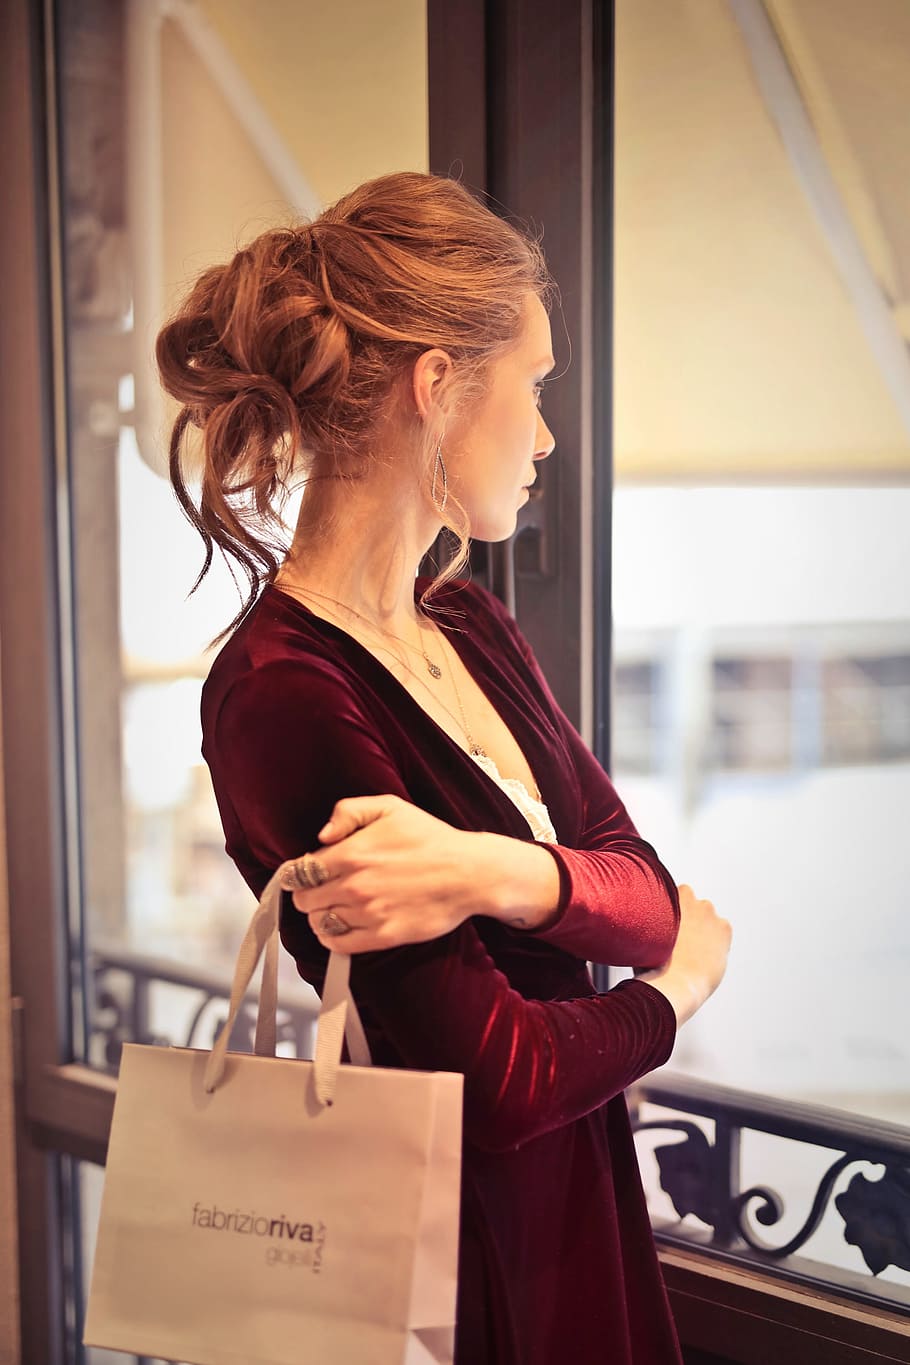 A young blond woman with elegant hair bun wearing a satin dress holding shopping bag in her hand looks out of the windows